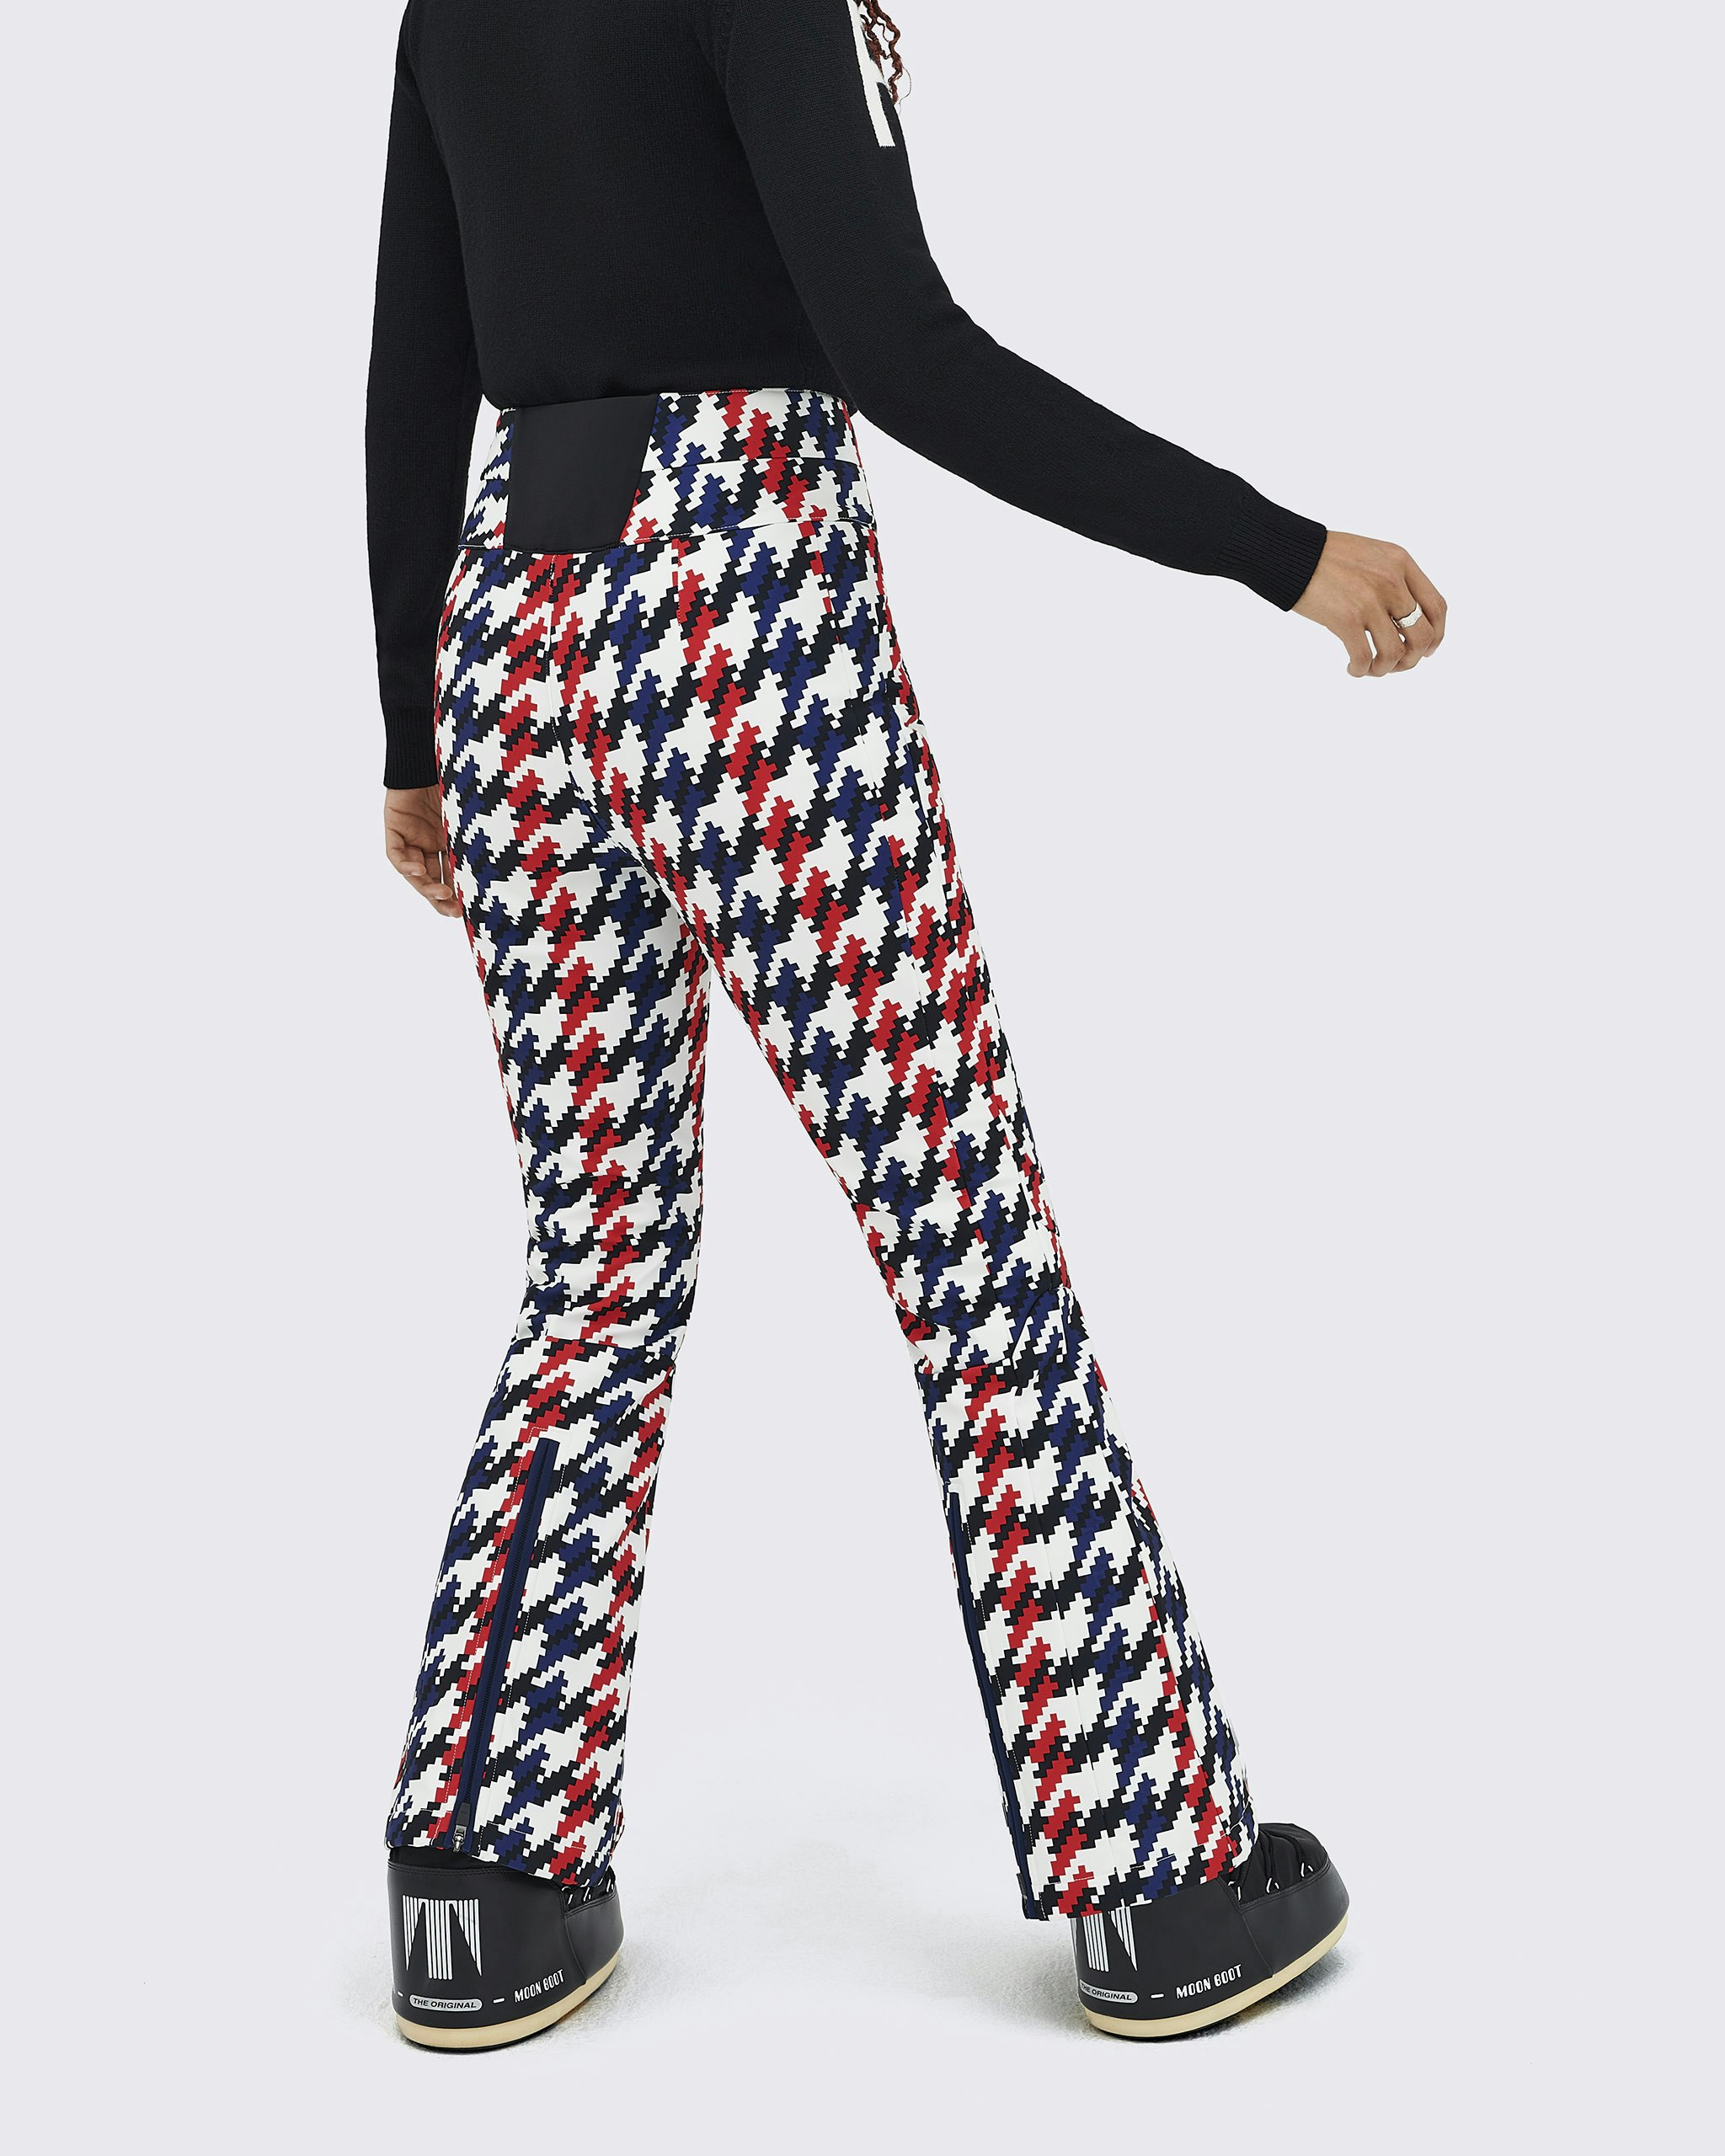 Perfect Moment Aurora High Waist Flare Womens Ski Pants in Houndstooth